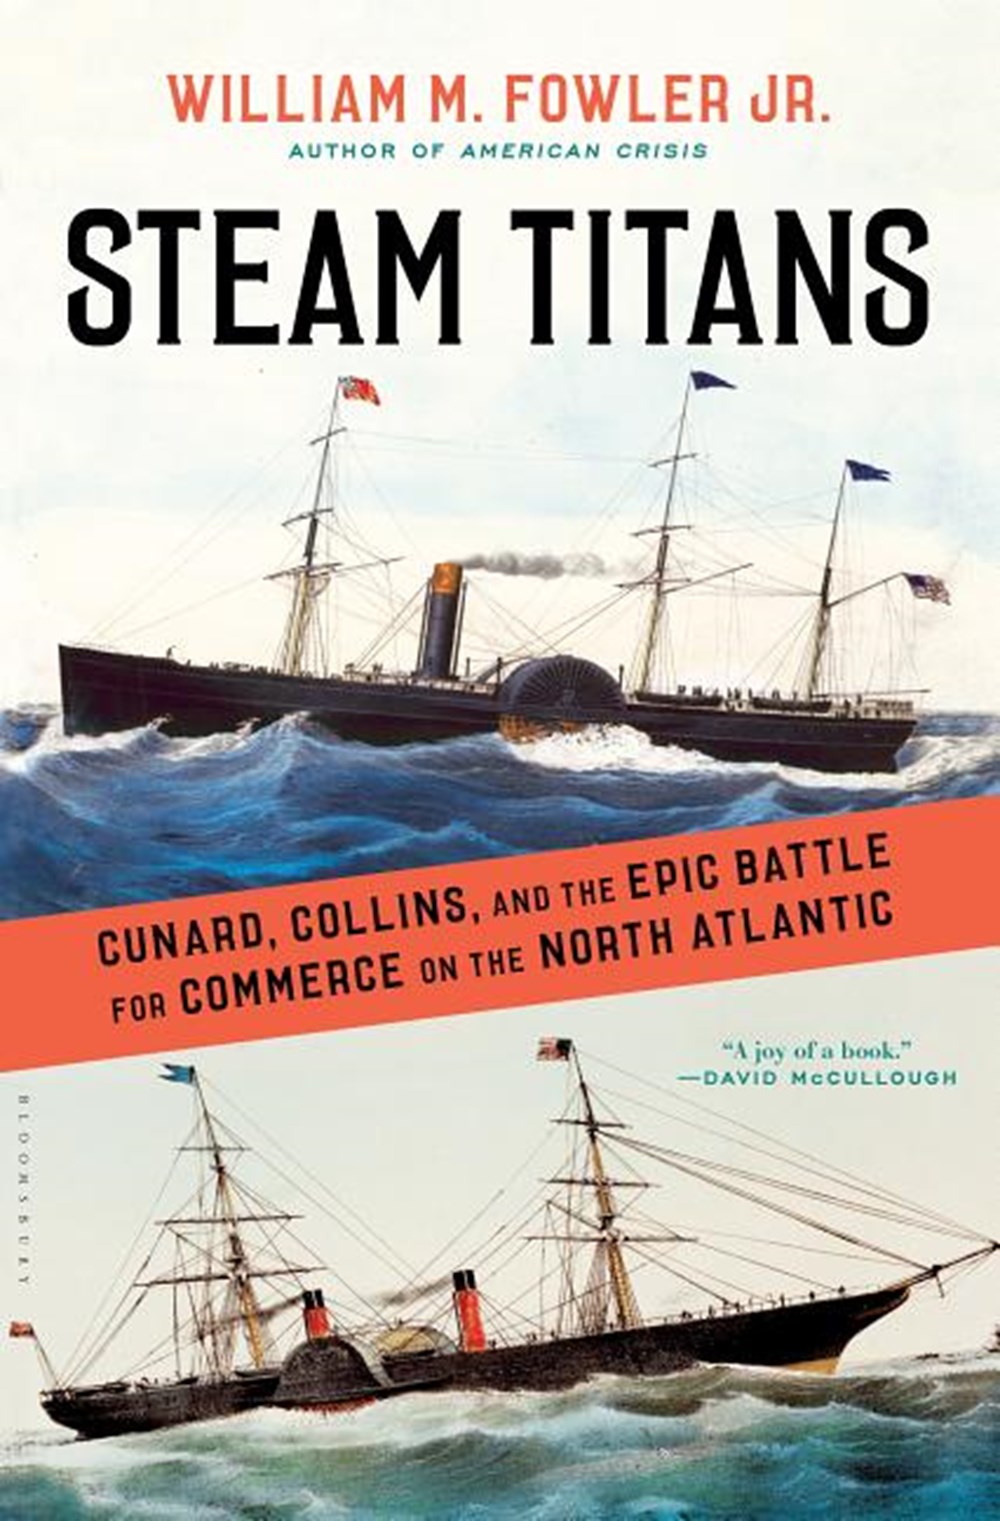 Steam Titans: Cunard, Collins, and the Epic Battle for Commerce on the North Atlantic